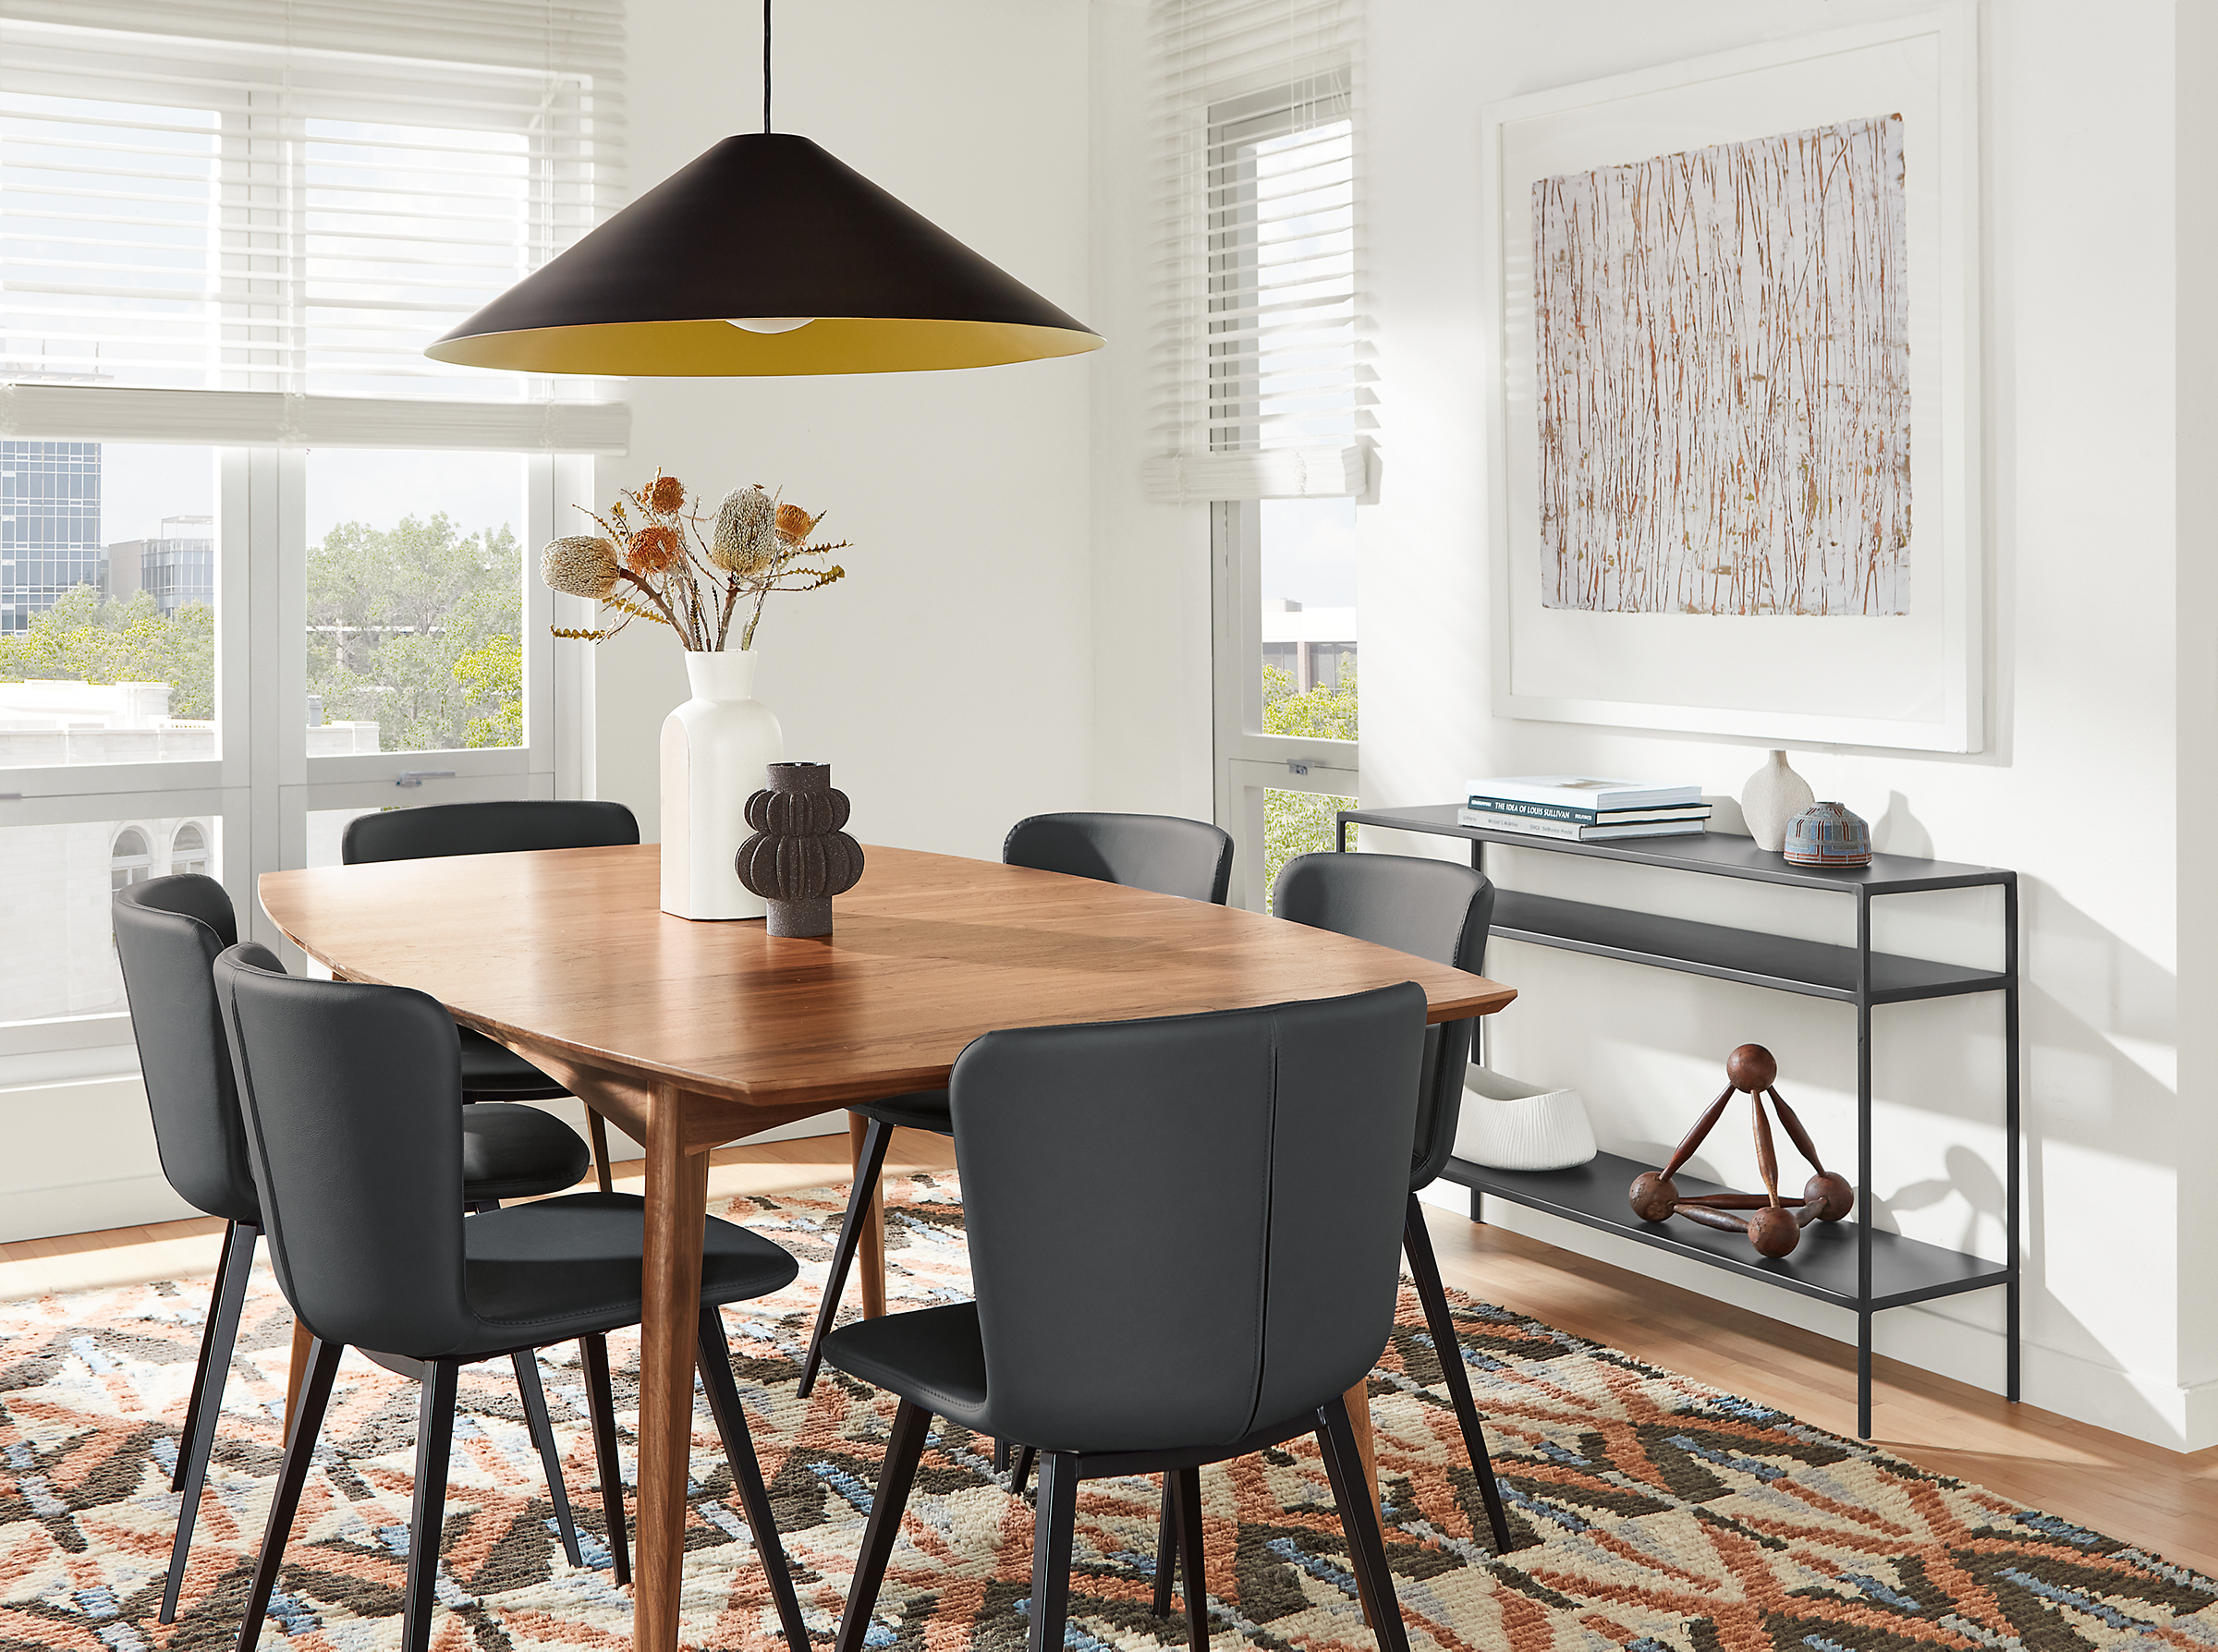 dining room with ventura extension table in walnut and delilah dining chairs with black leather seats.